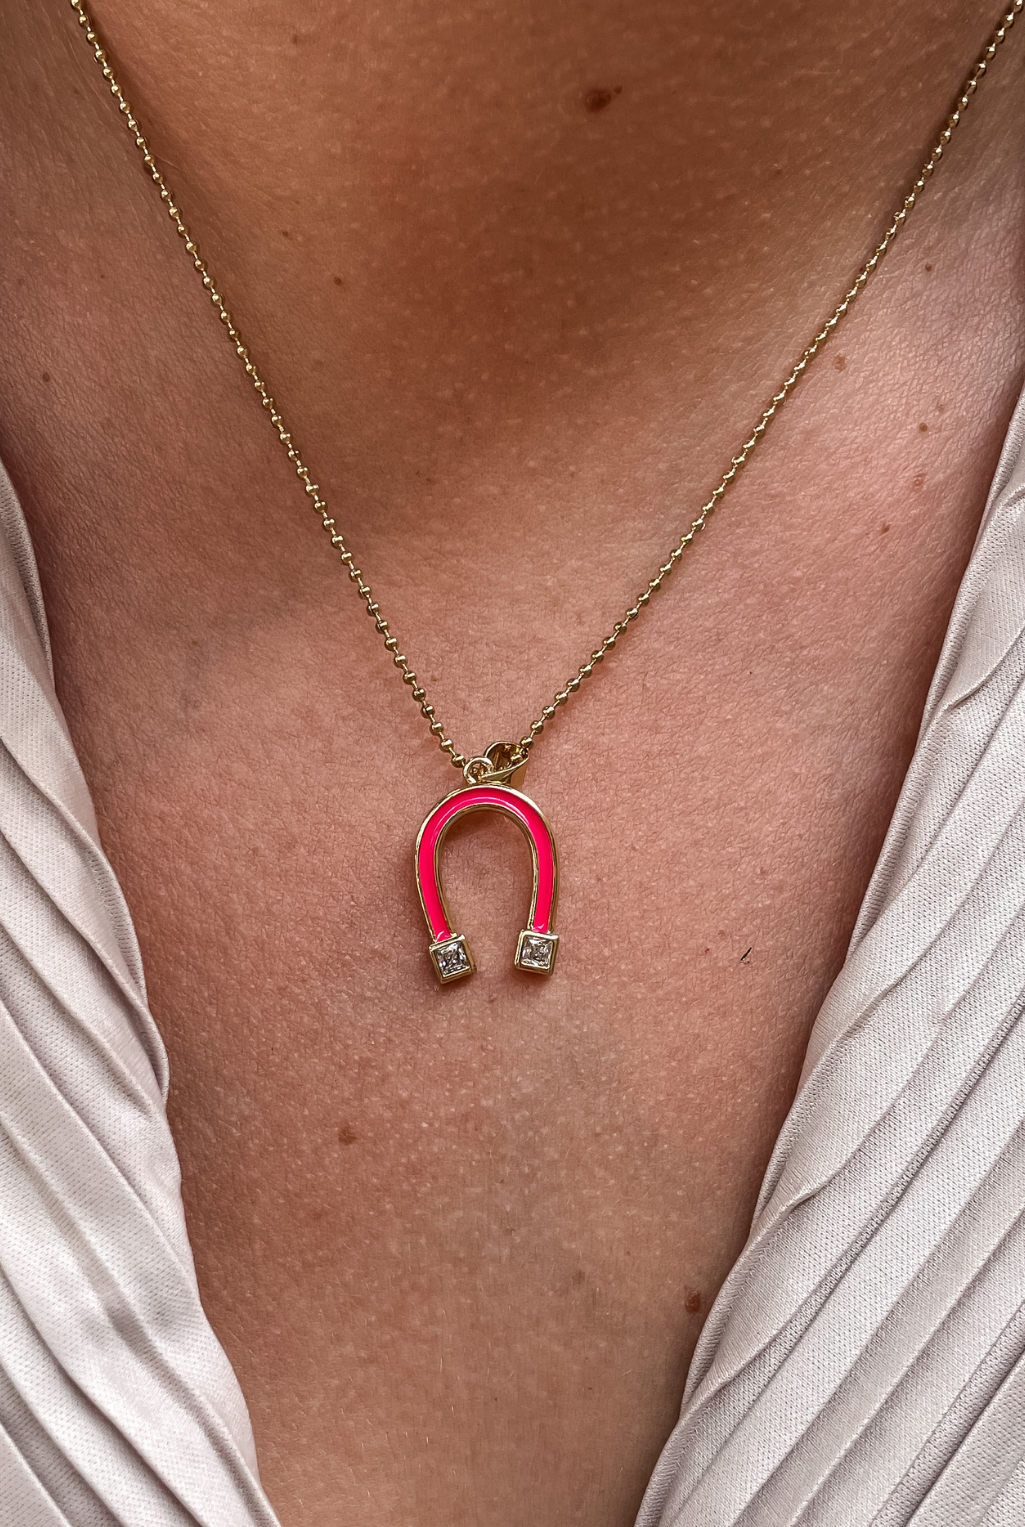 Just My Luck Necklace - Fuchsia